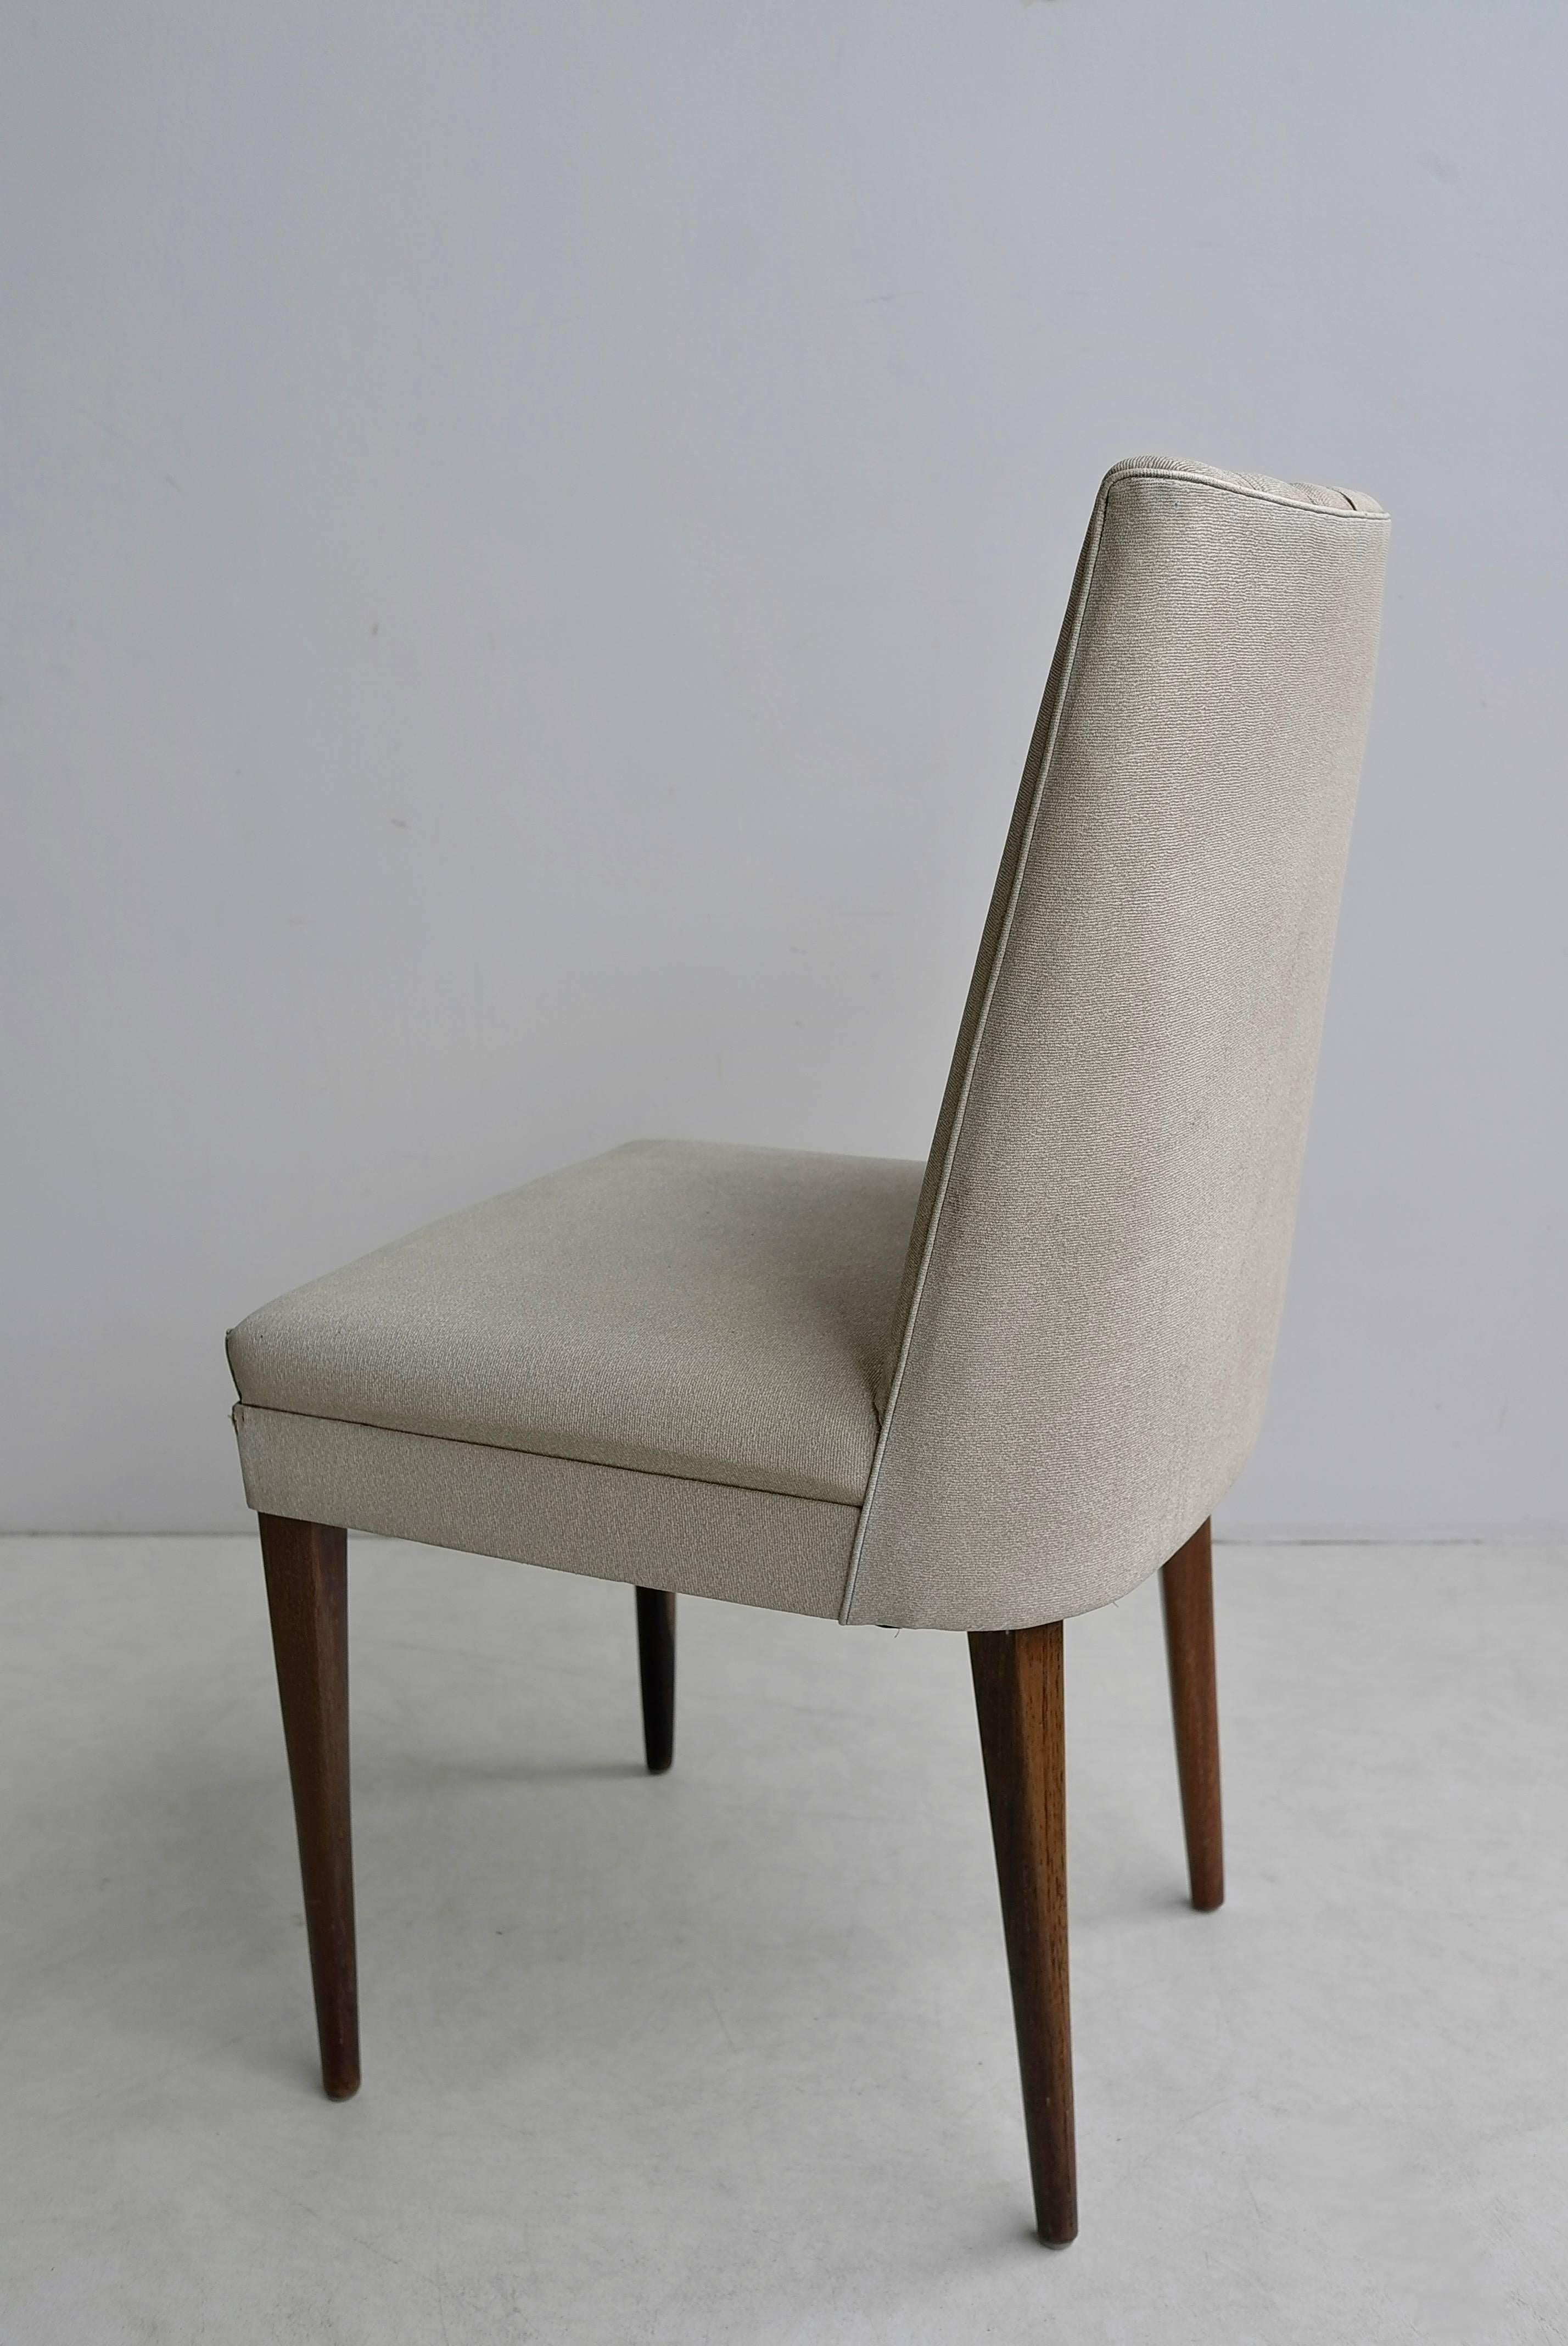 Elegant white desk chair with wooden legs, Italy, 1950s.